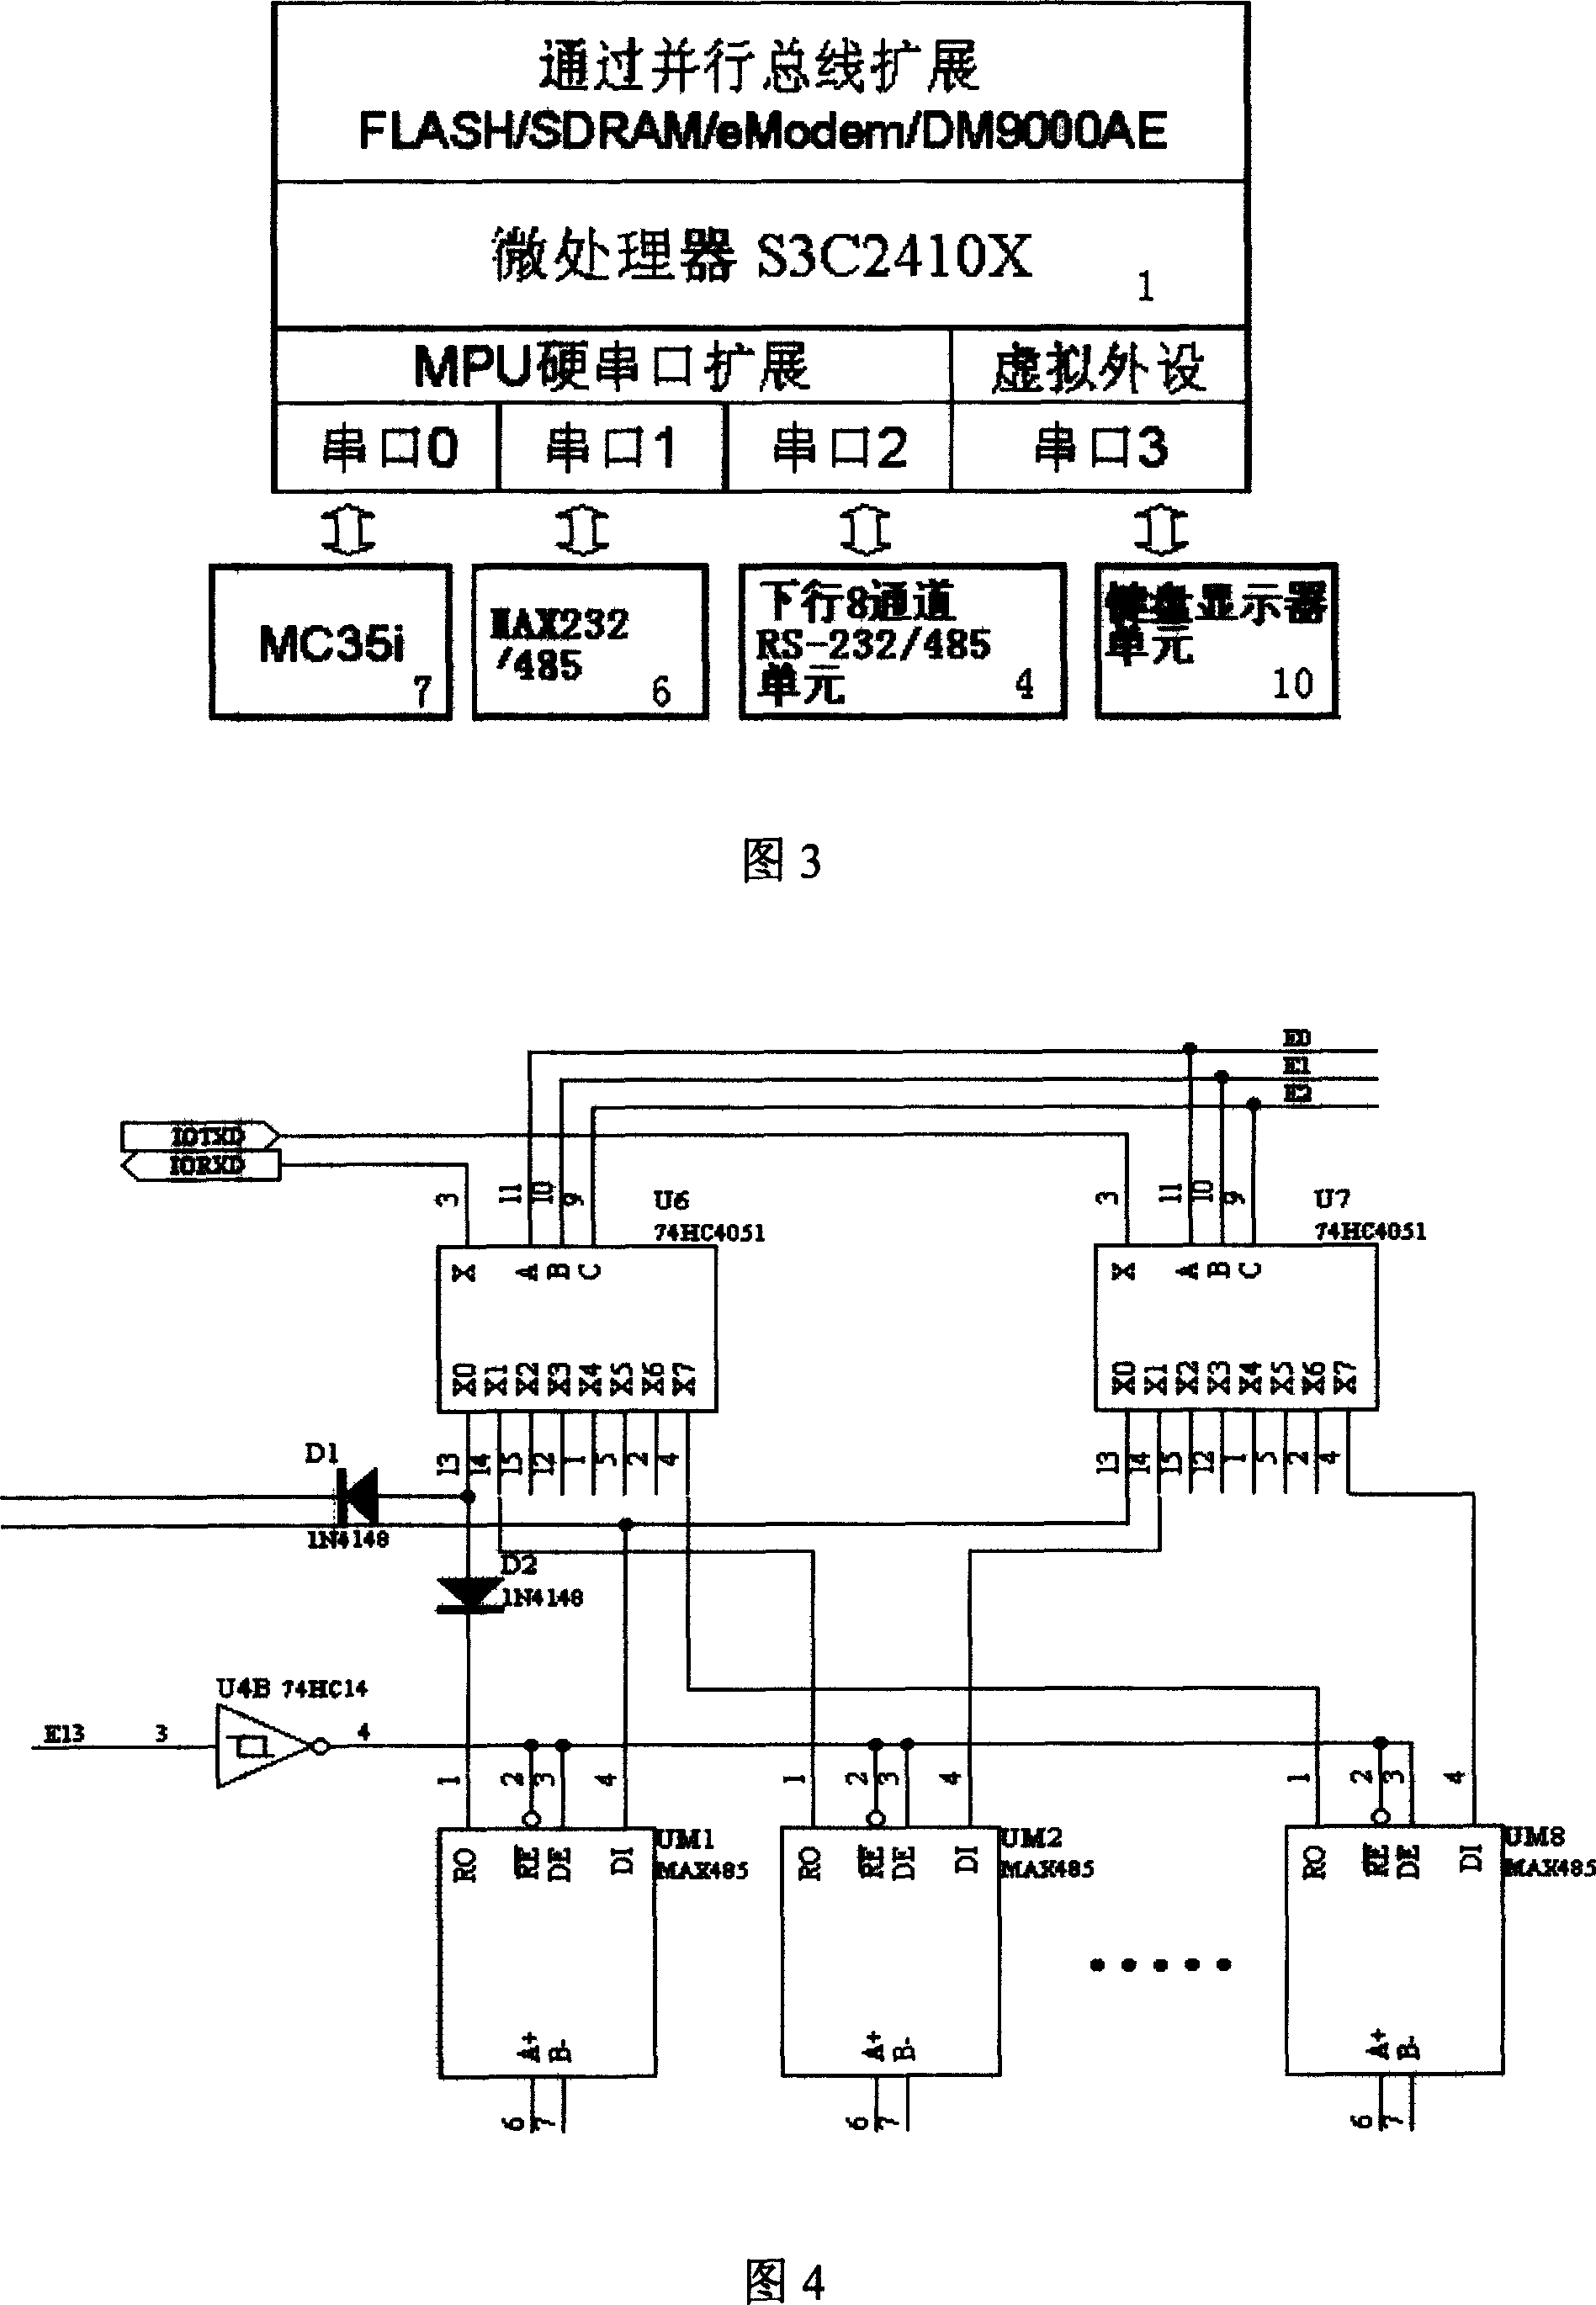 Collecting and controlling device for date of environmental protection with multiple network interface based on two-level architecture